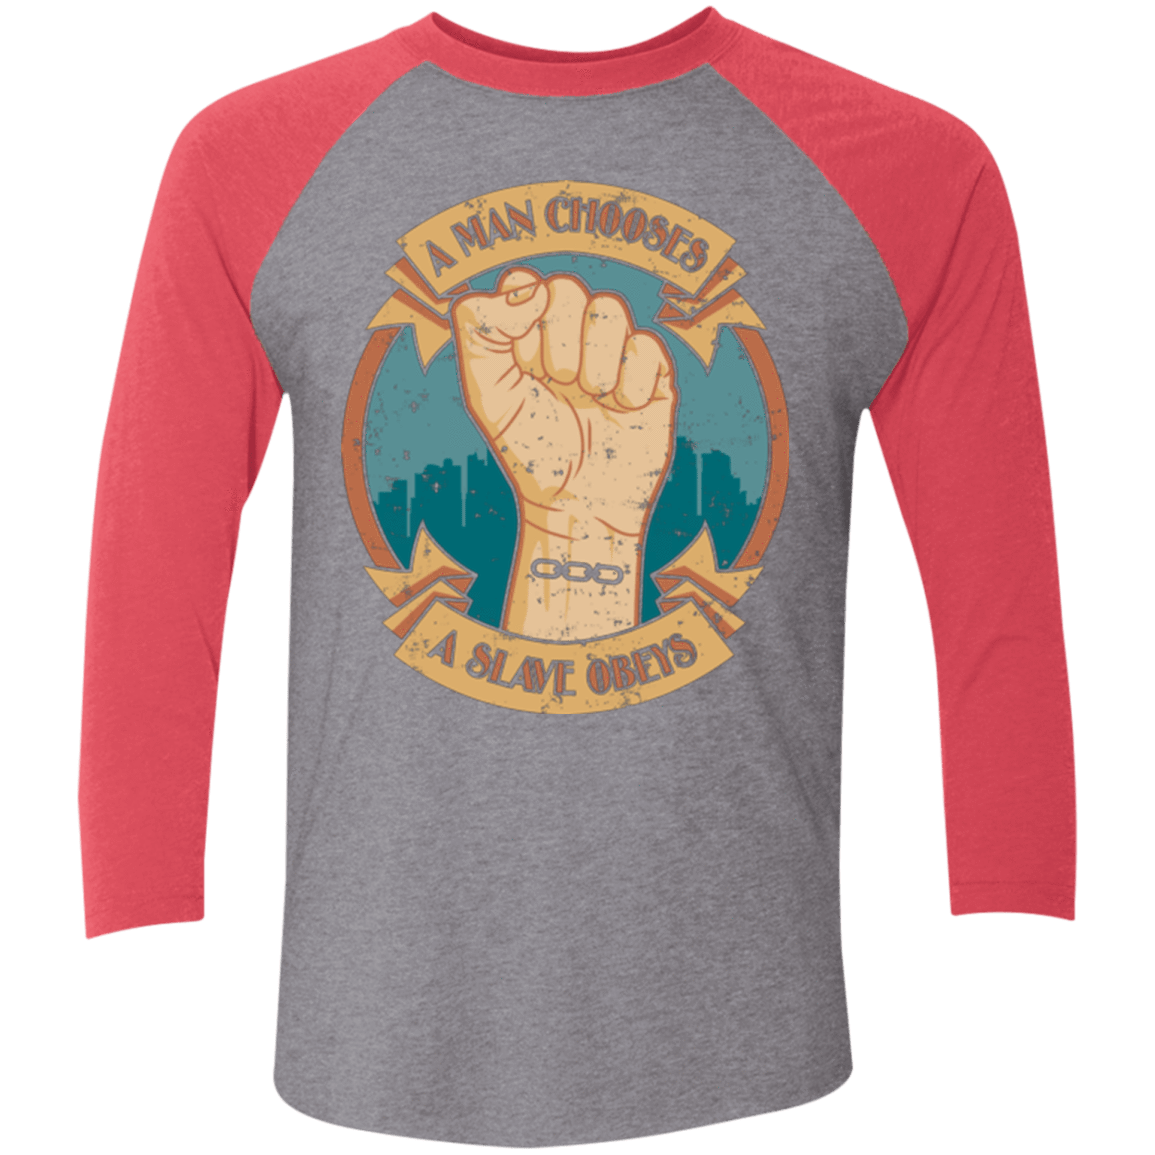 T-Shirts Premium Heather/ Vintage Red / X-Small A Man Chooses A Slave Obeys Triblend 3/4 Sleeve